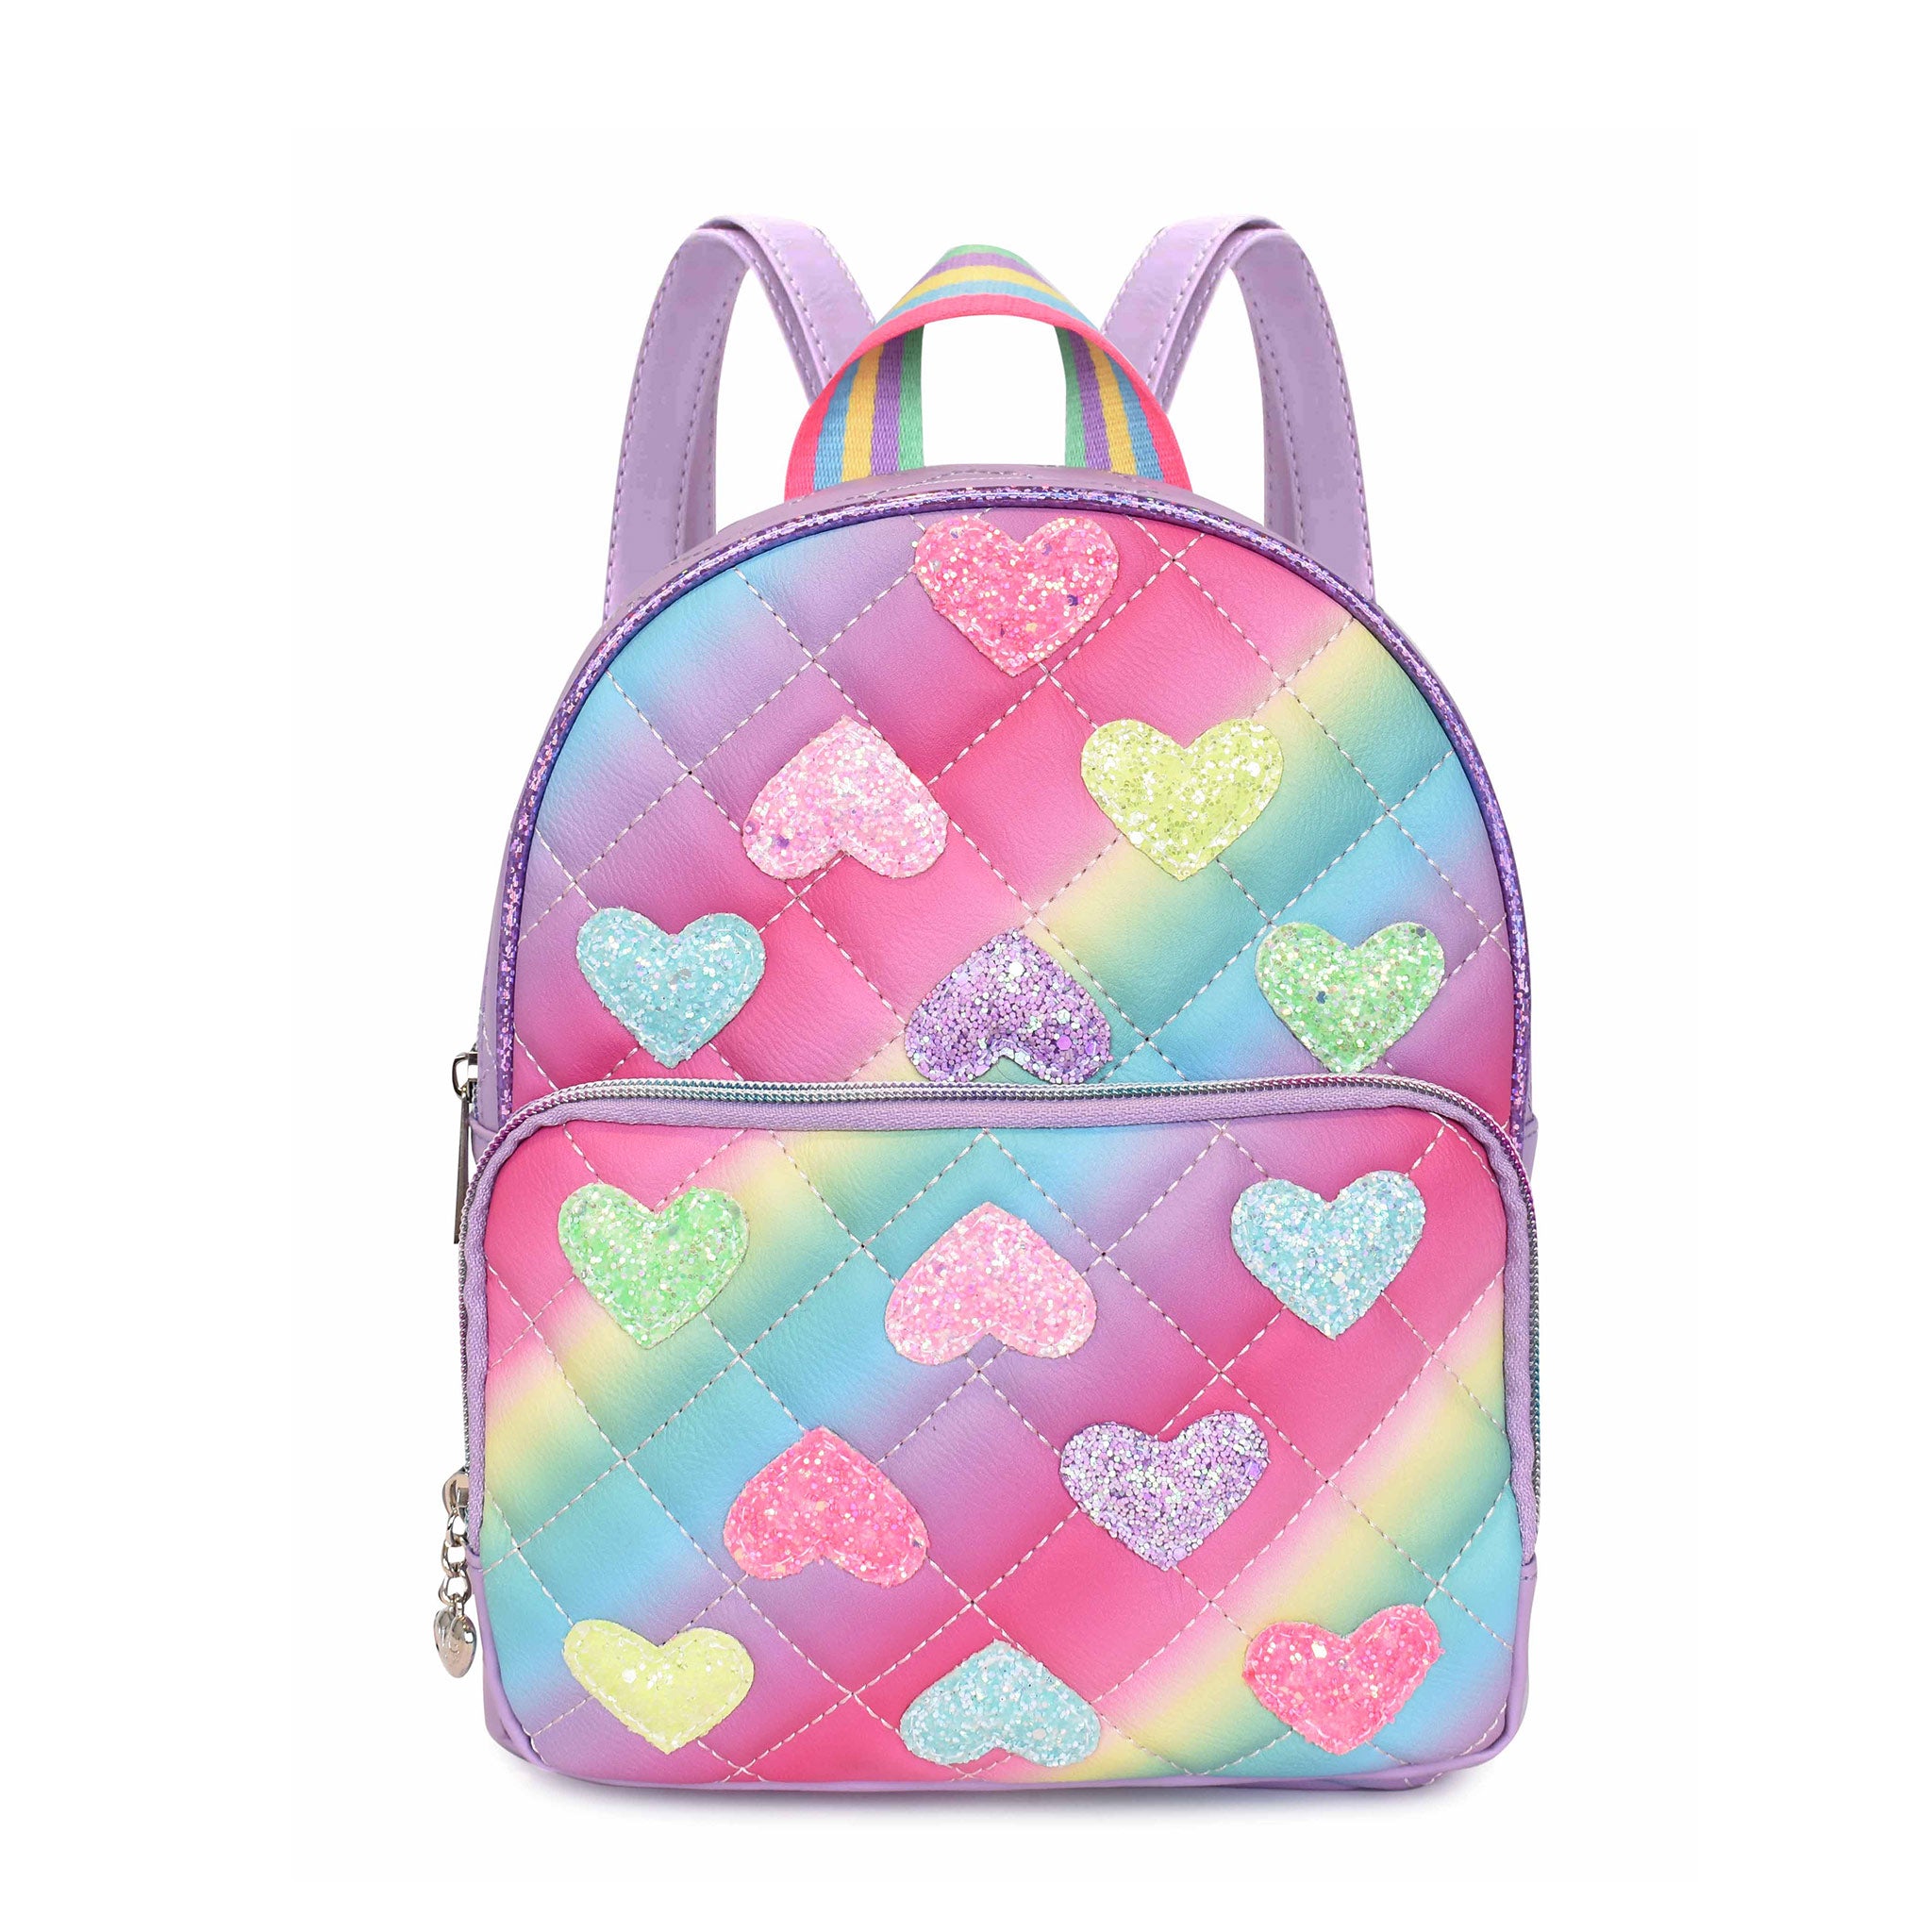 Front view of an ombre quilted mini backpack with glitter heart patches